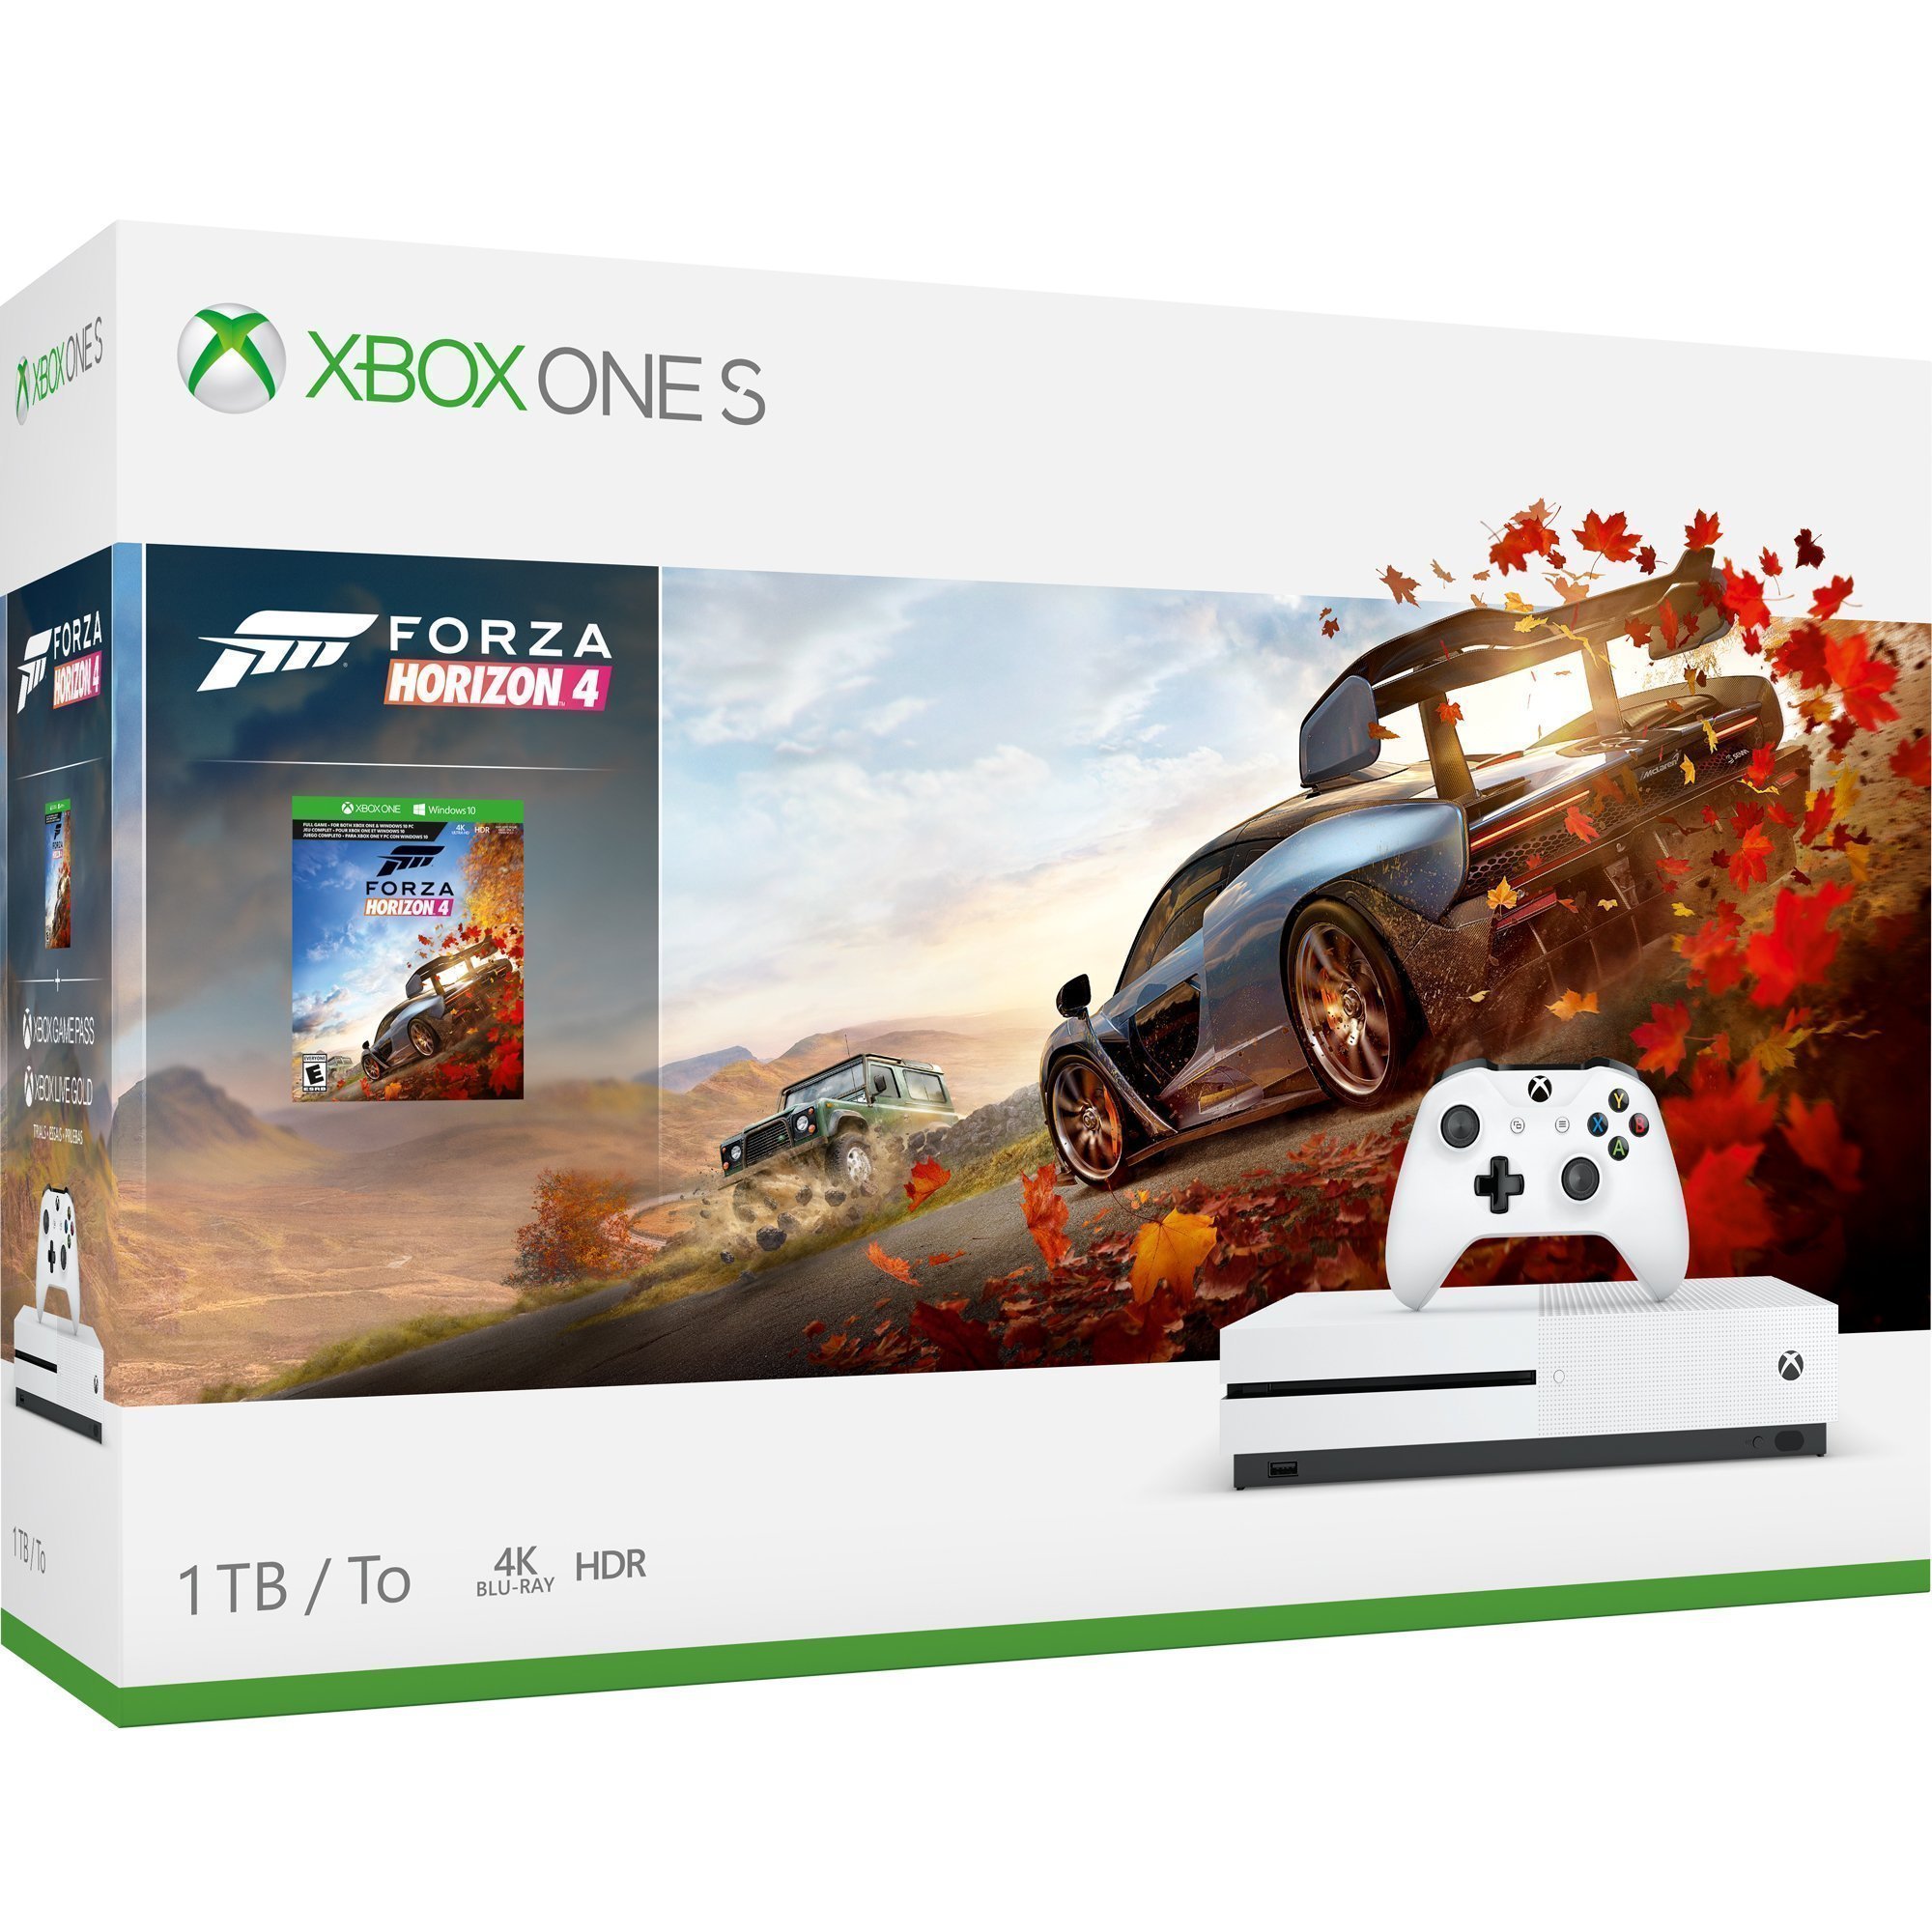 Gamescom 2018 Xbox One Bundles and Accessories Guide Xbox-One-S-Forza-Horizon-4-Bundle-Front-Angle-Box-Shot.jpg